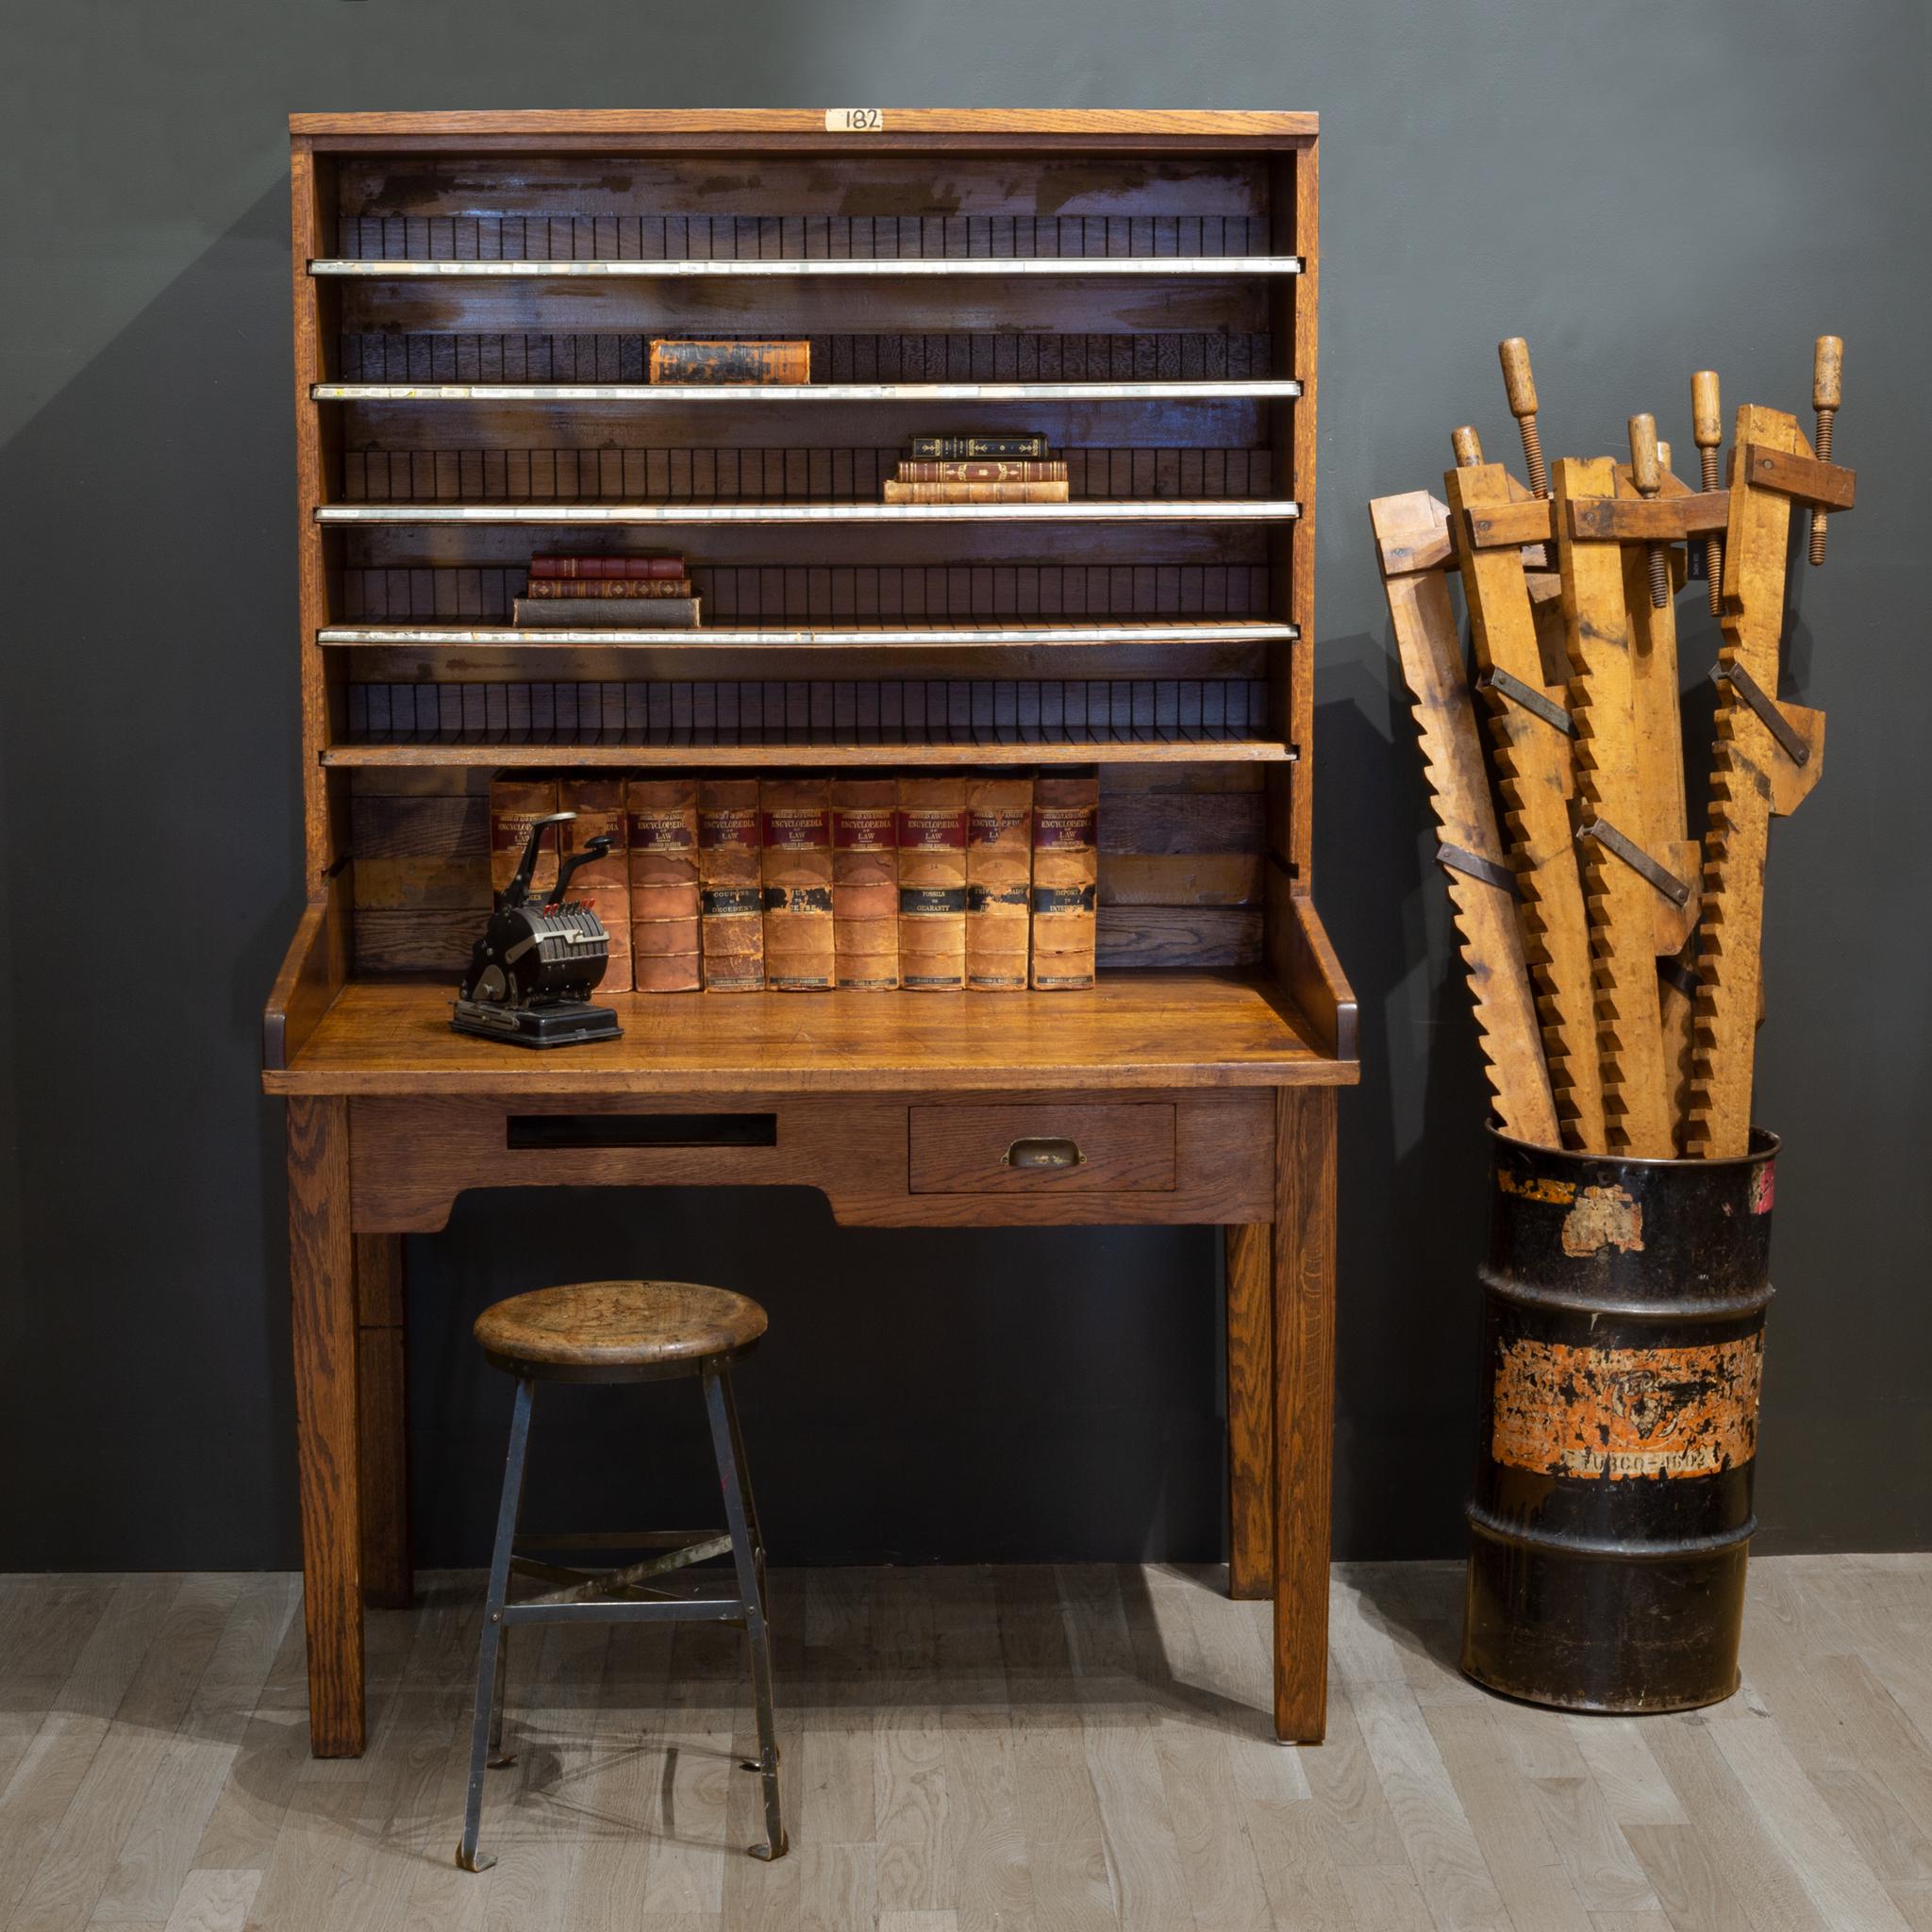 About

An antique solid oak postal desk with several removable shelves, drawer with brass handle, document slot and postal messenger bag hook underneath. Each shelf has slots for letters and original labels. The desk is stamped on the the top